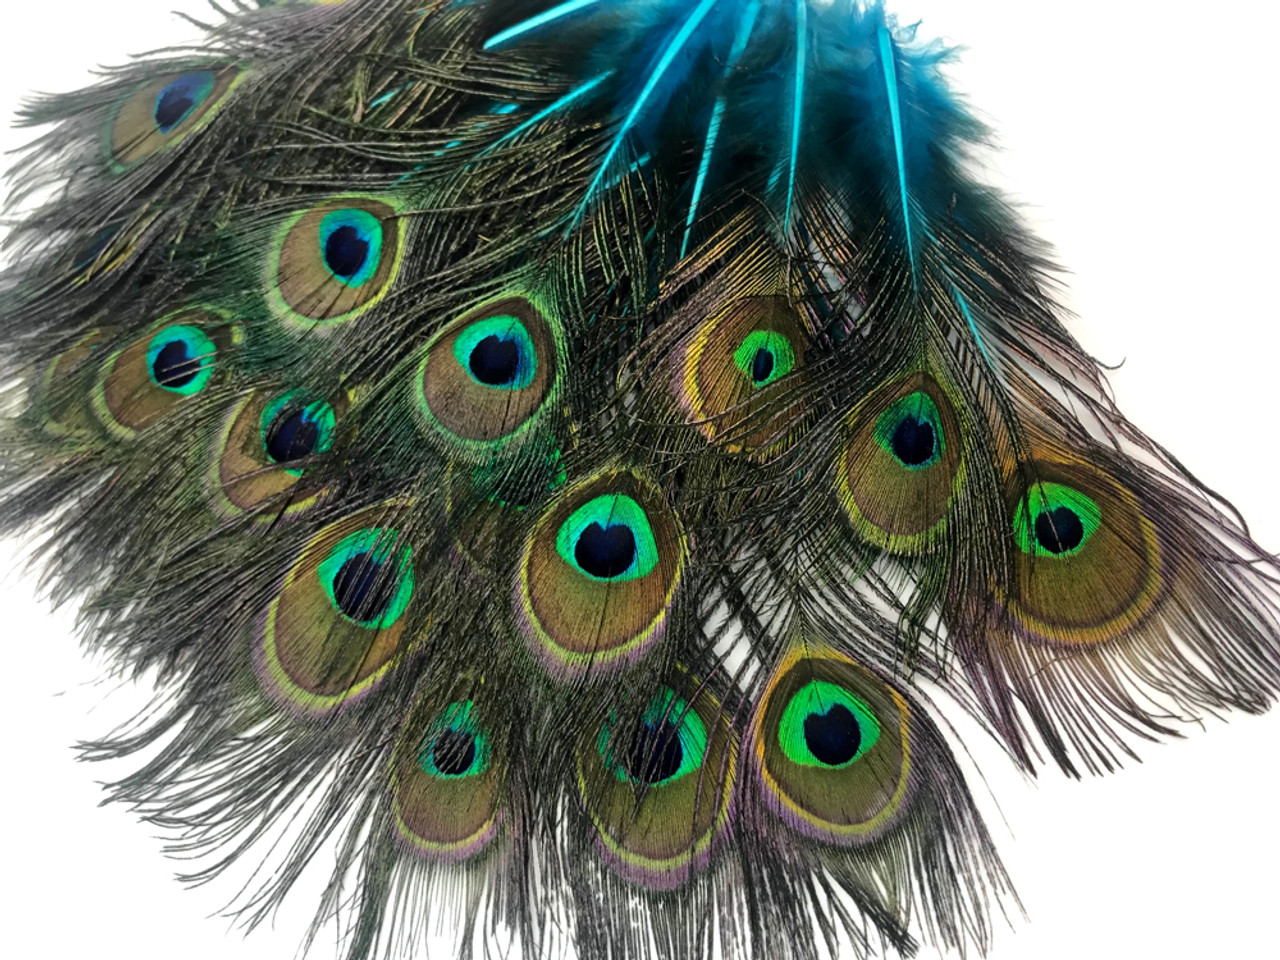 Peacock feathers in turquoise, green and blue printed on 7/8